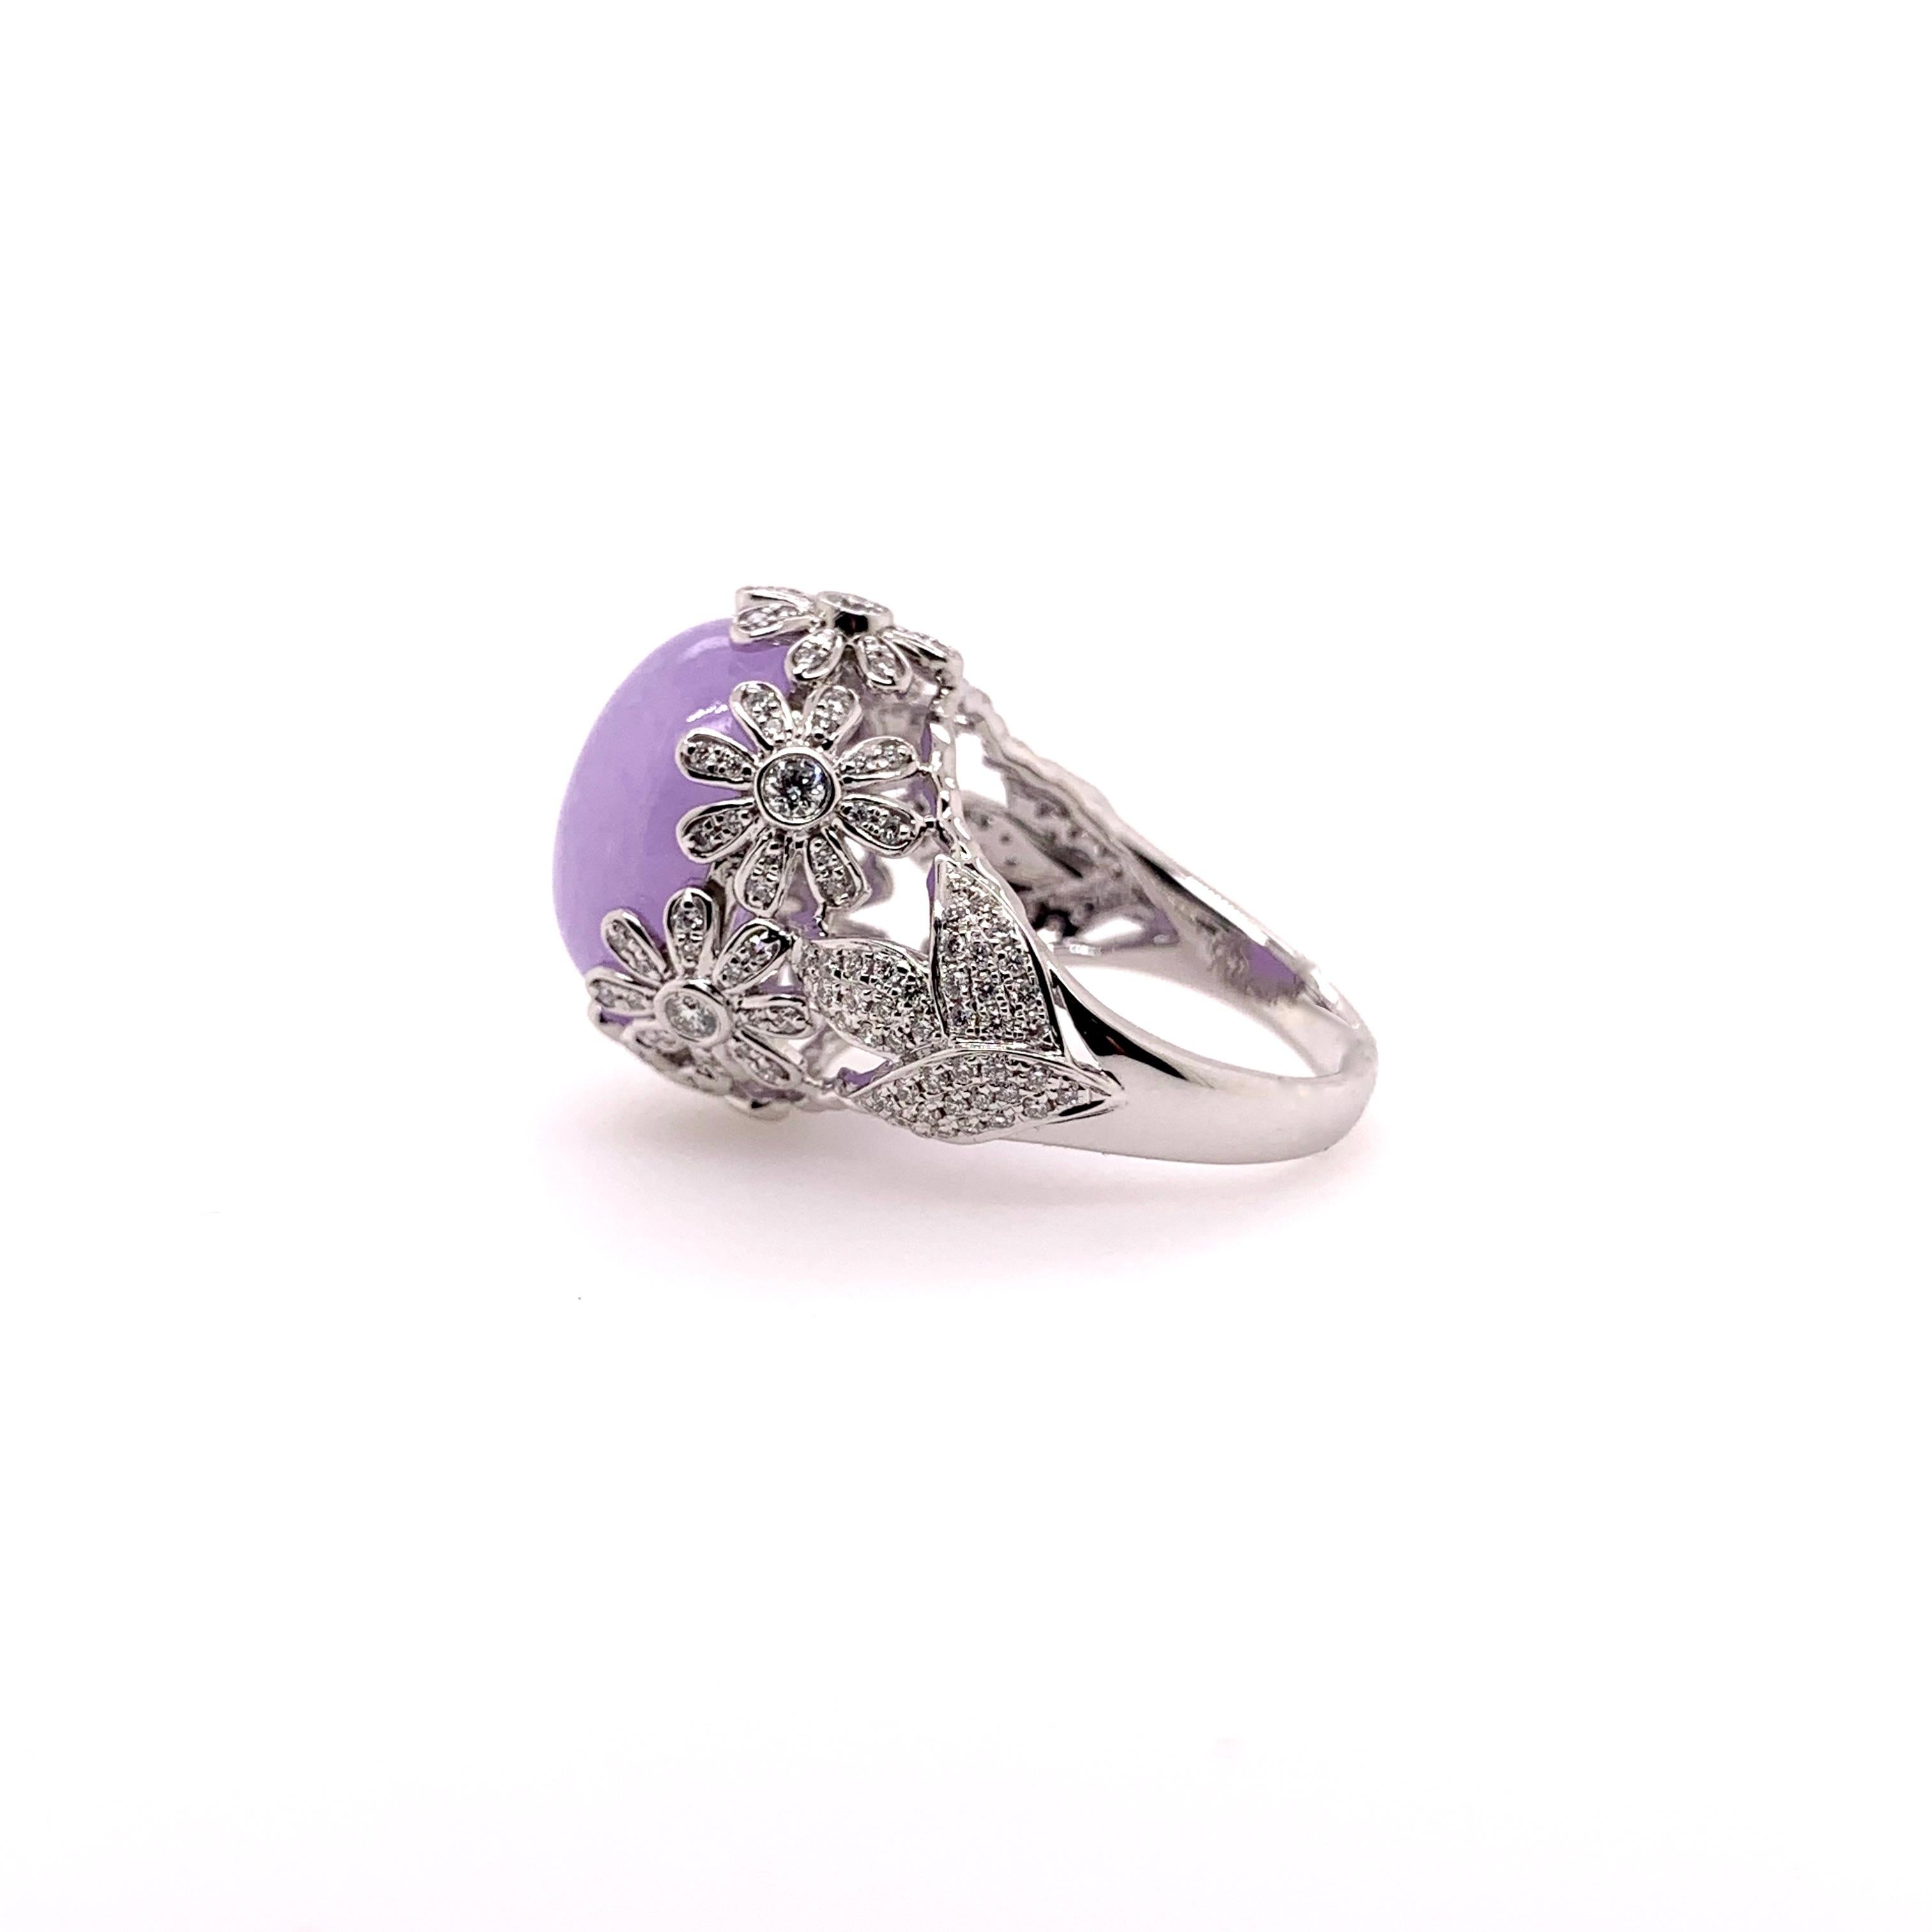 Handmade floral setting for this gorgeous GIA certified lavender cabachon jadeite ring!   The meticulous details in the flower-style setting accentuates the soothing color of the jadeite.  The round brilliant diamonds come to 0.76 cts. total weight